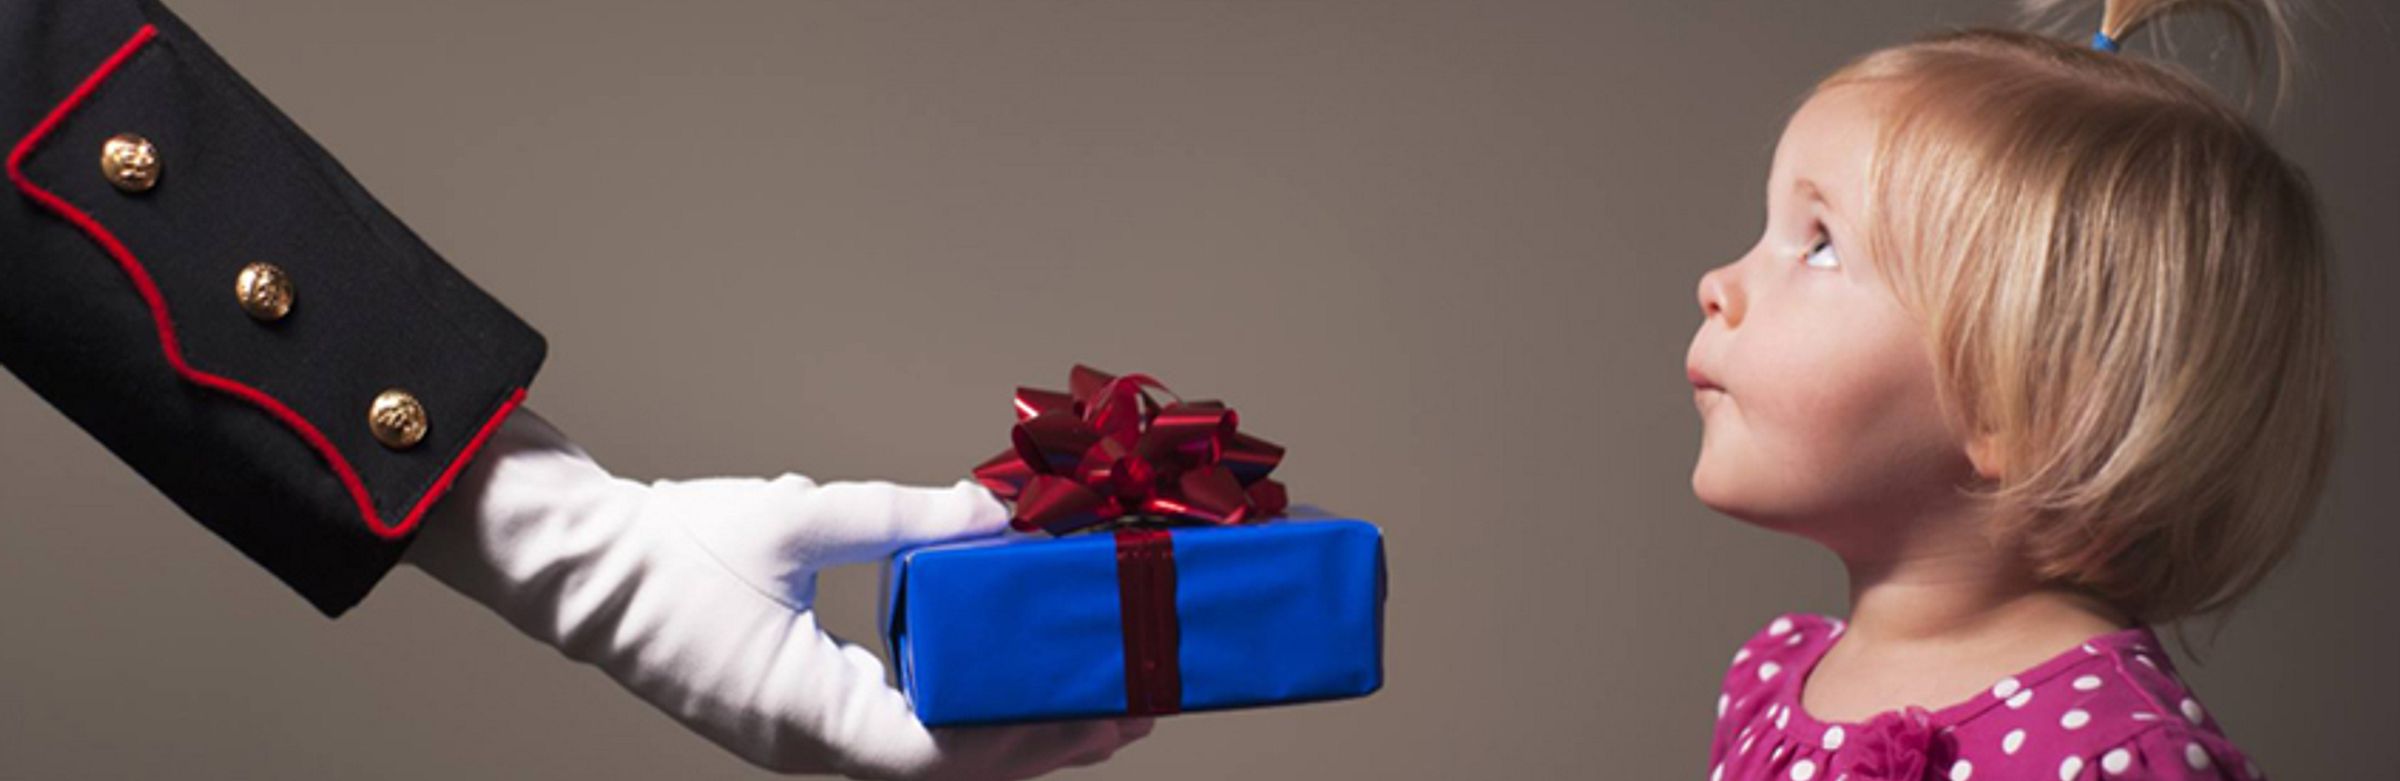 The hand of a person in a full dress military uniform hands a wrapped present to a small child